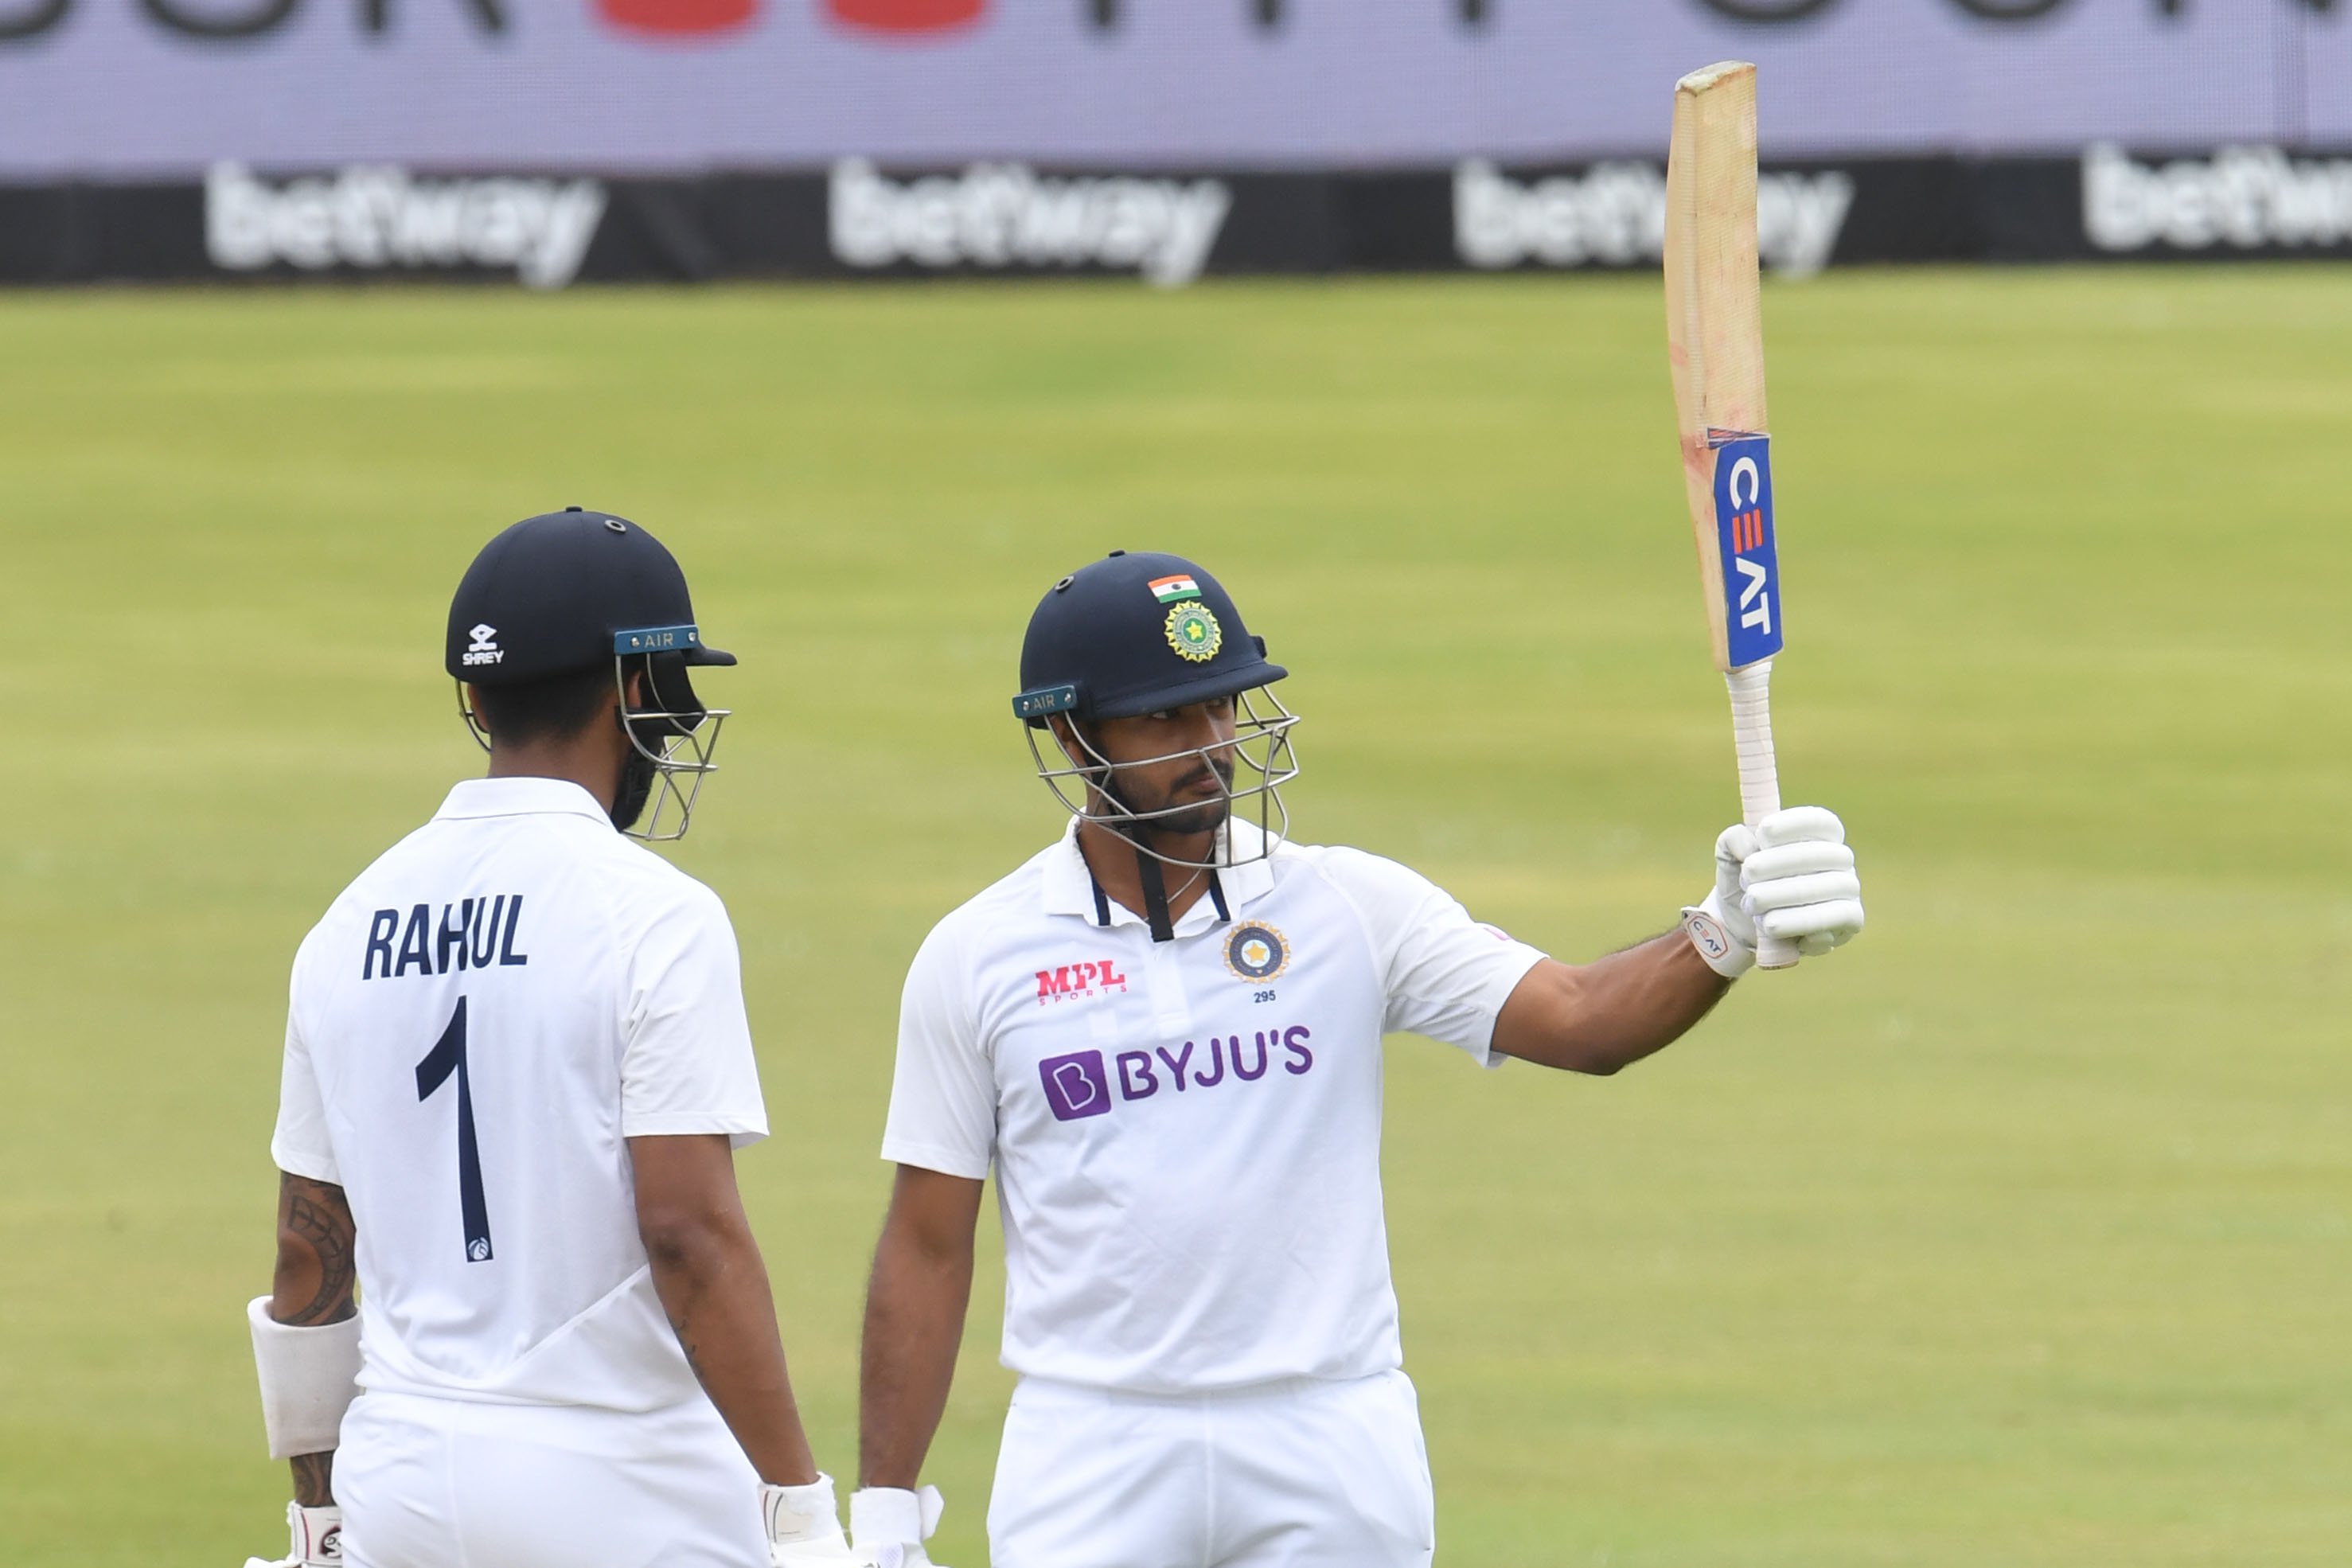 Rahane reminds himself to watch the ball in Centurion